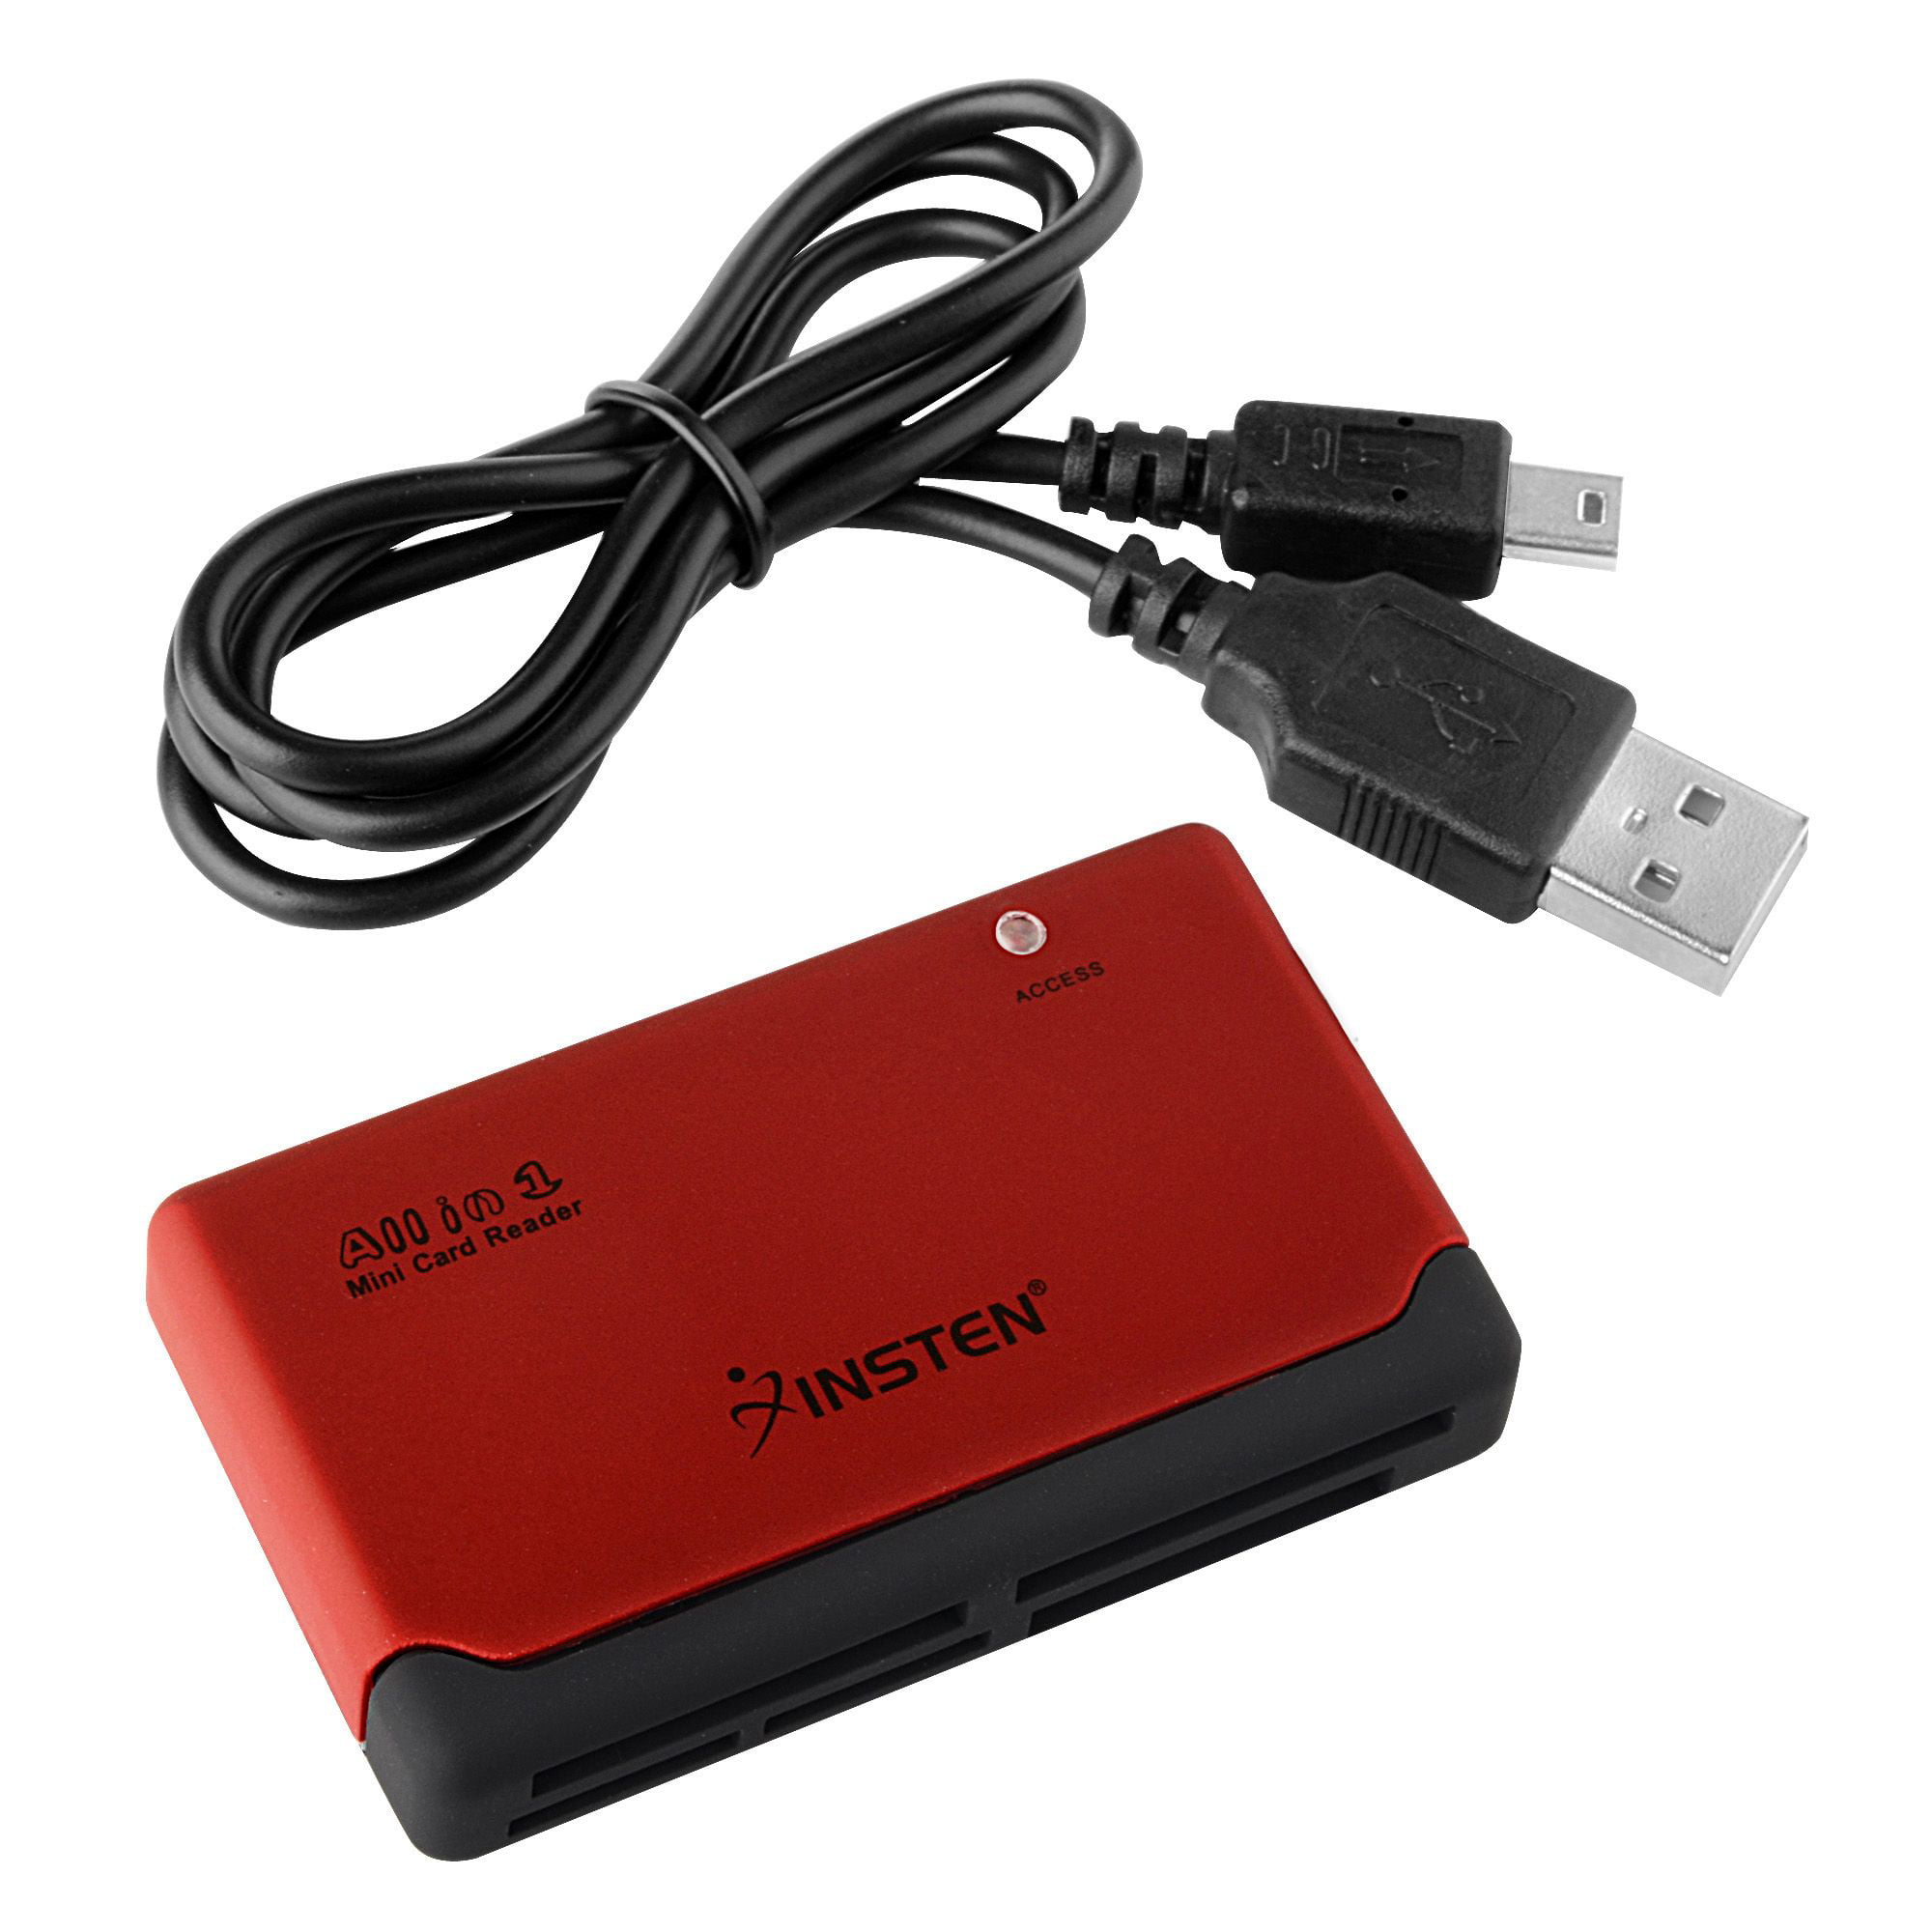 Insten 26-In-1 Memory Card Reader , Red (supports CF SD SDHC XD MMC Micro SD MS Pro Duo M2 Micro Drive)